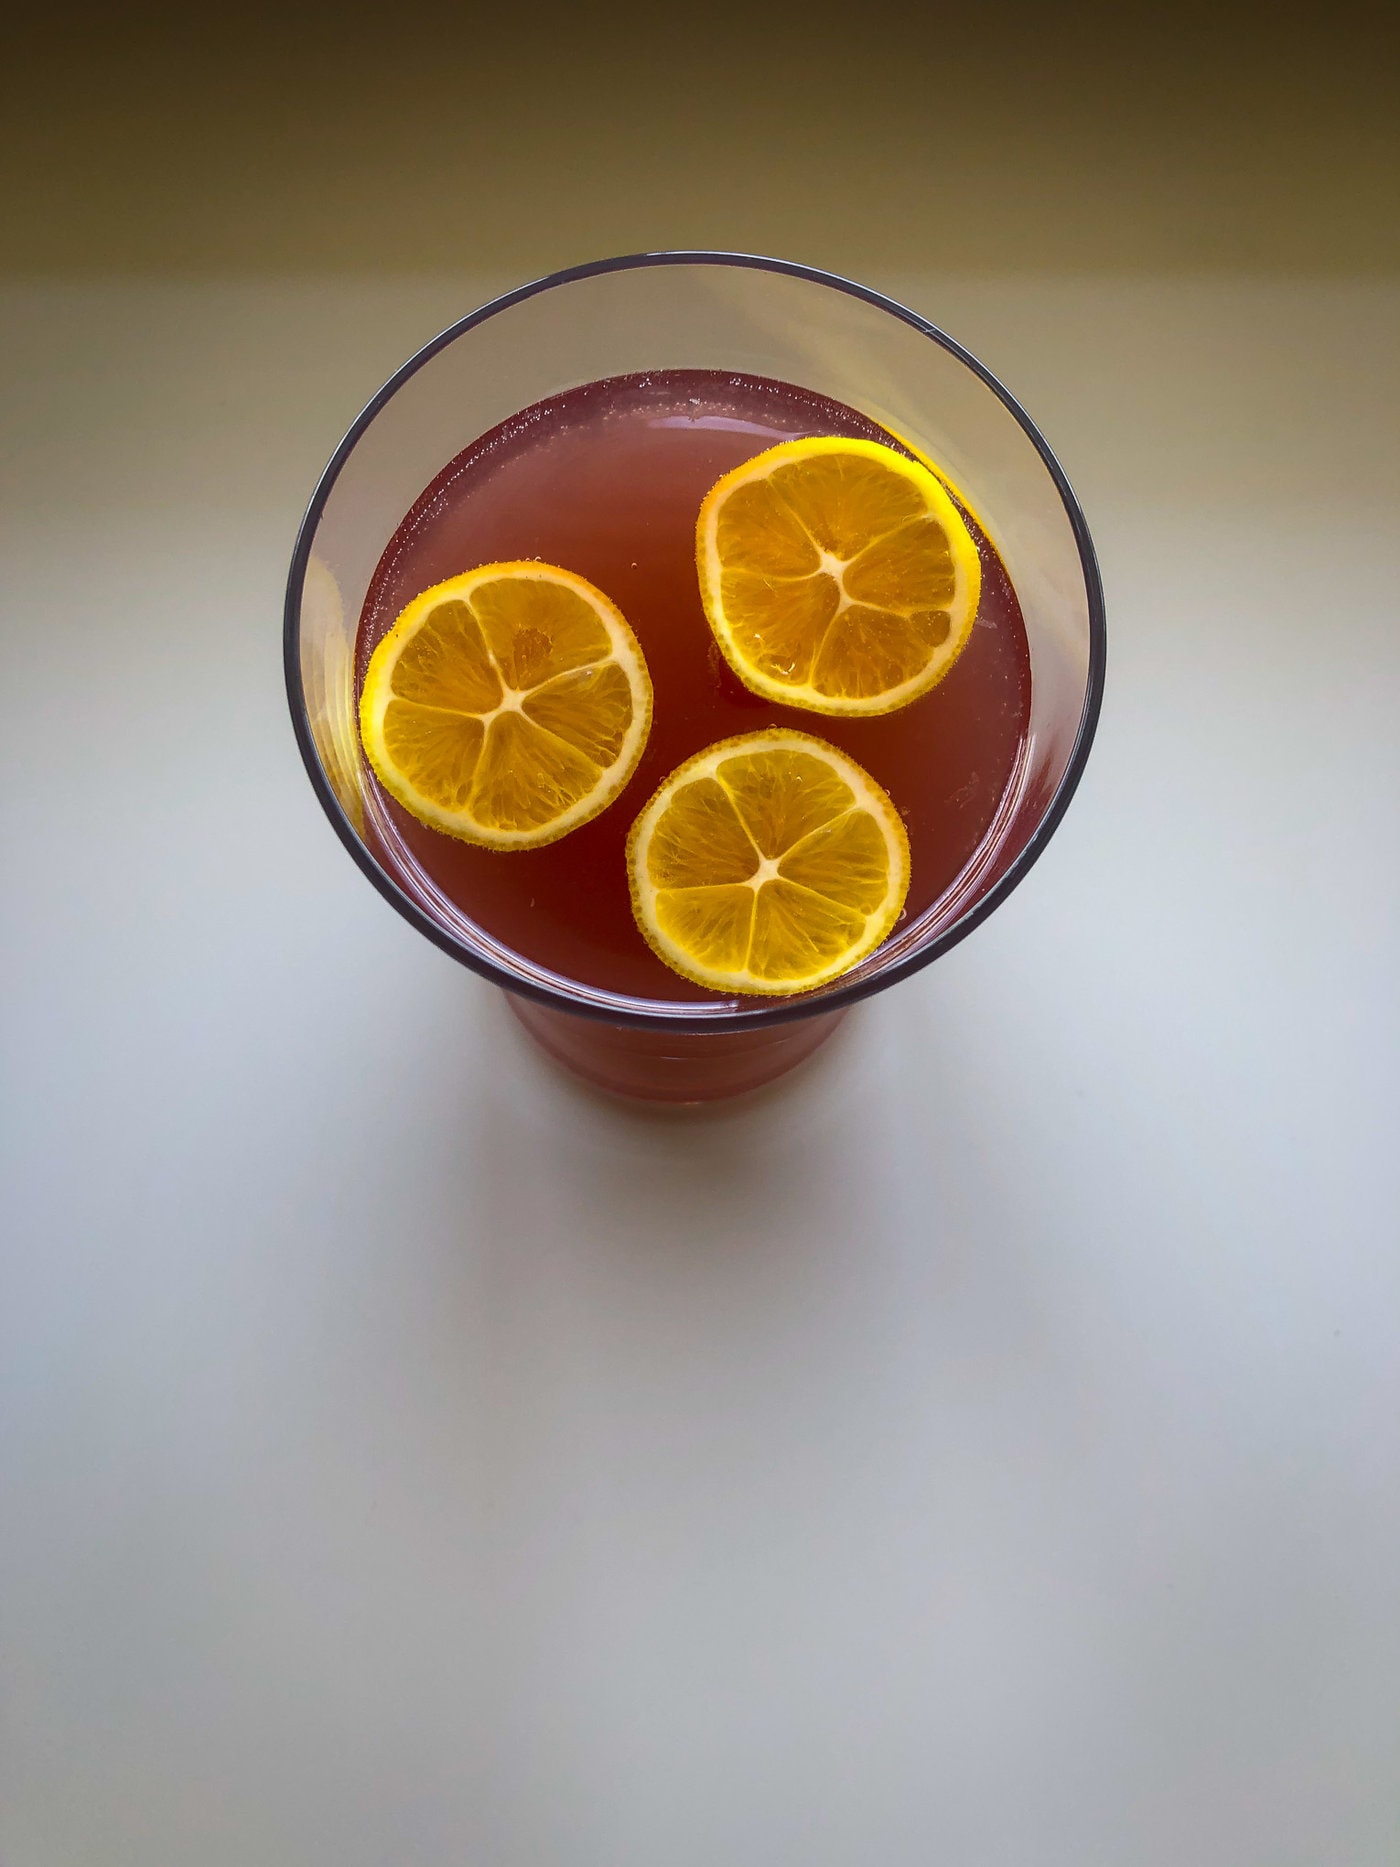 Top down shot of a glass with lemon slices floating in it